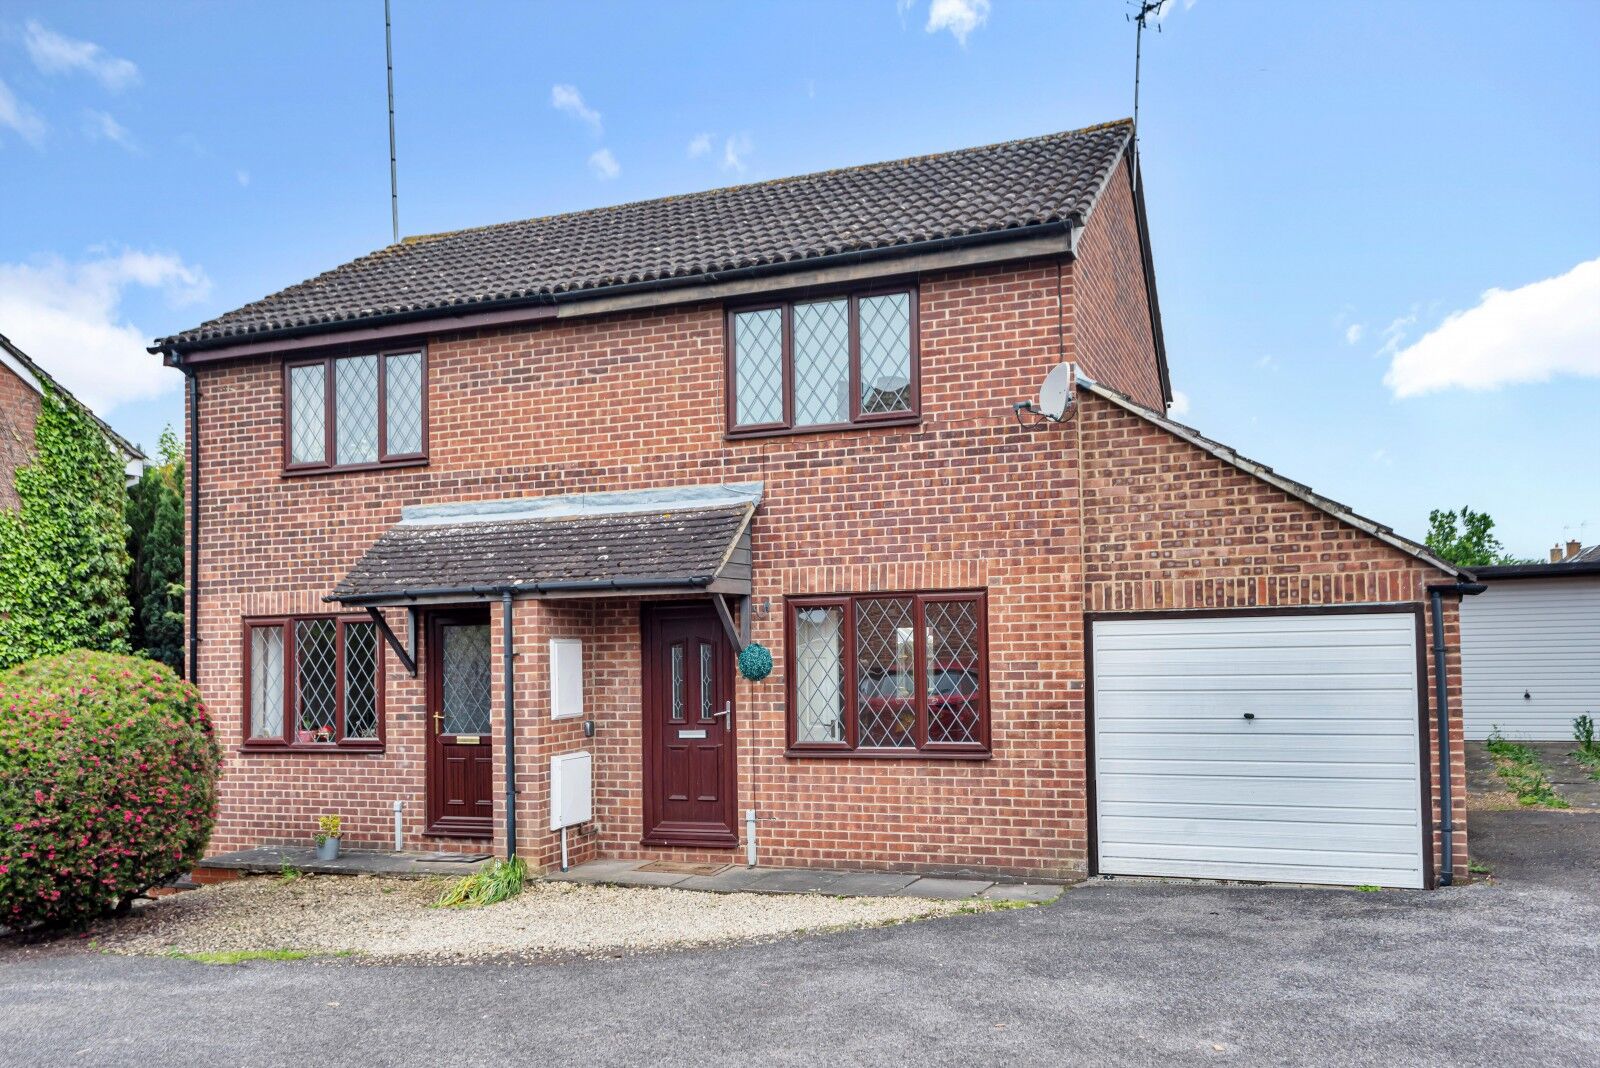 2 bedroom semi detached house for sale Kent Close, Abingdon-On-Thames, OX14, main image